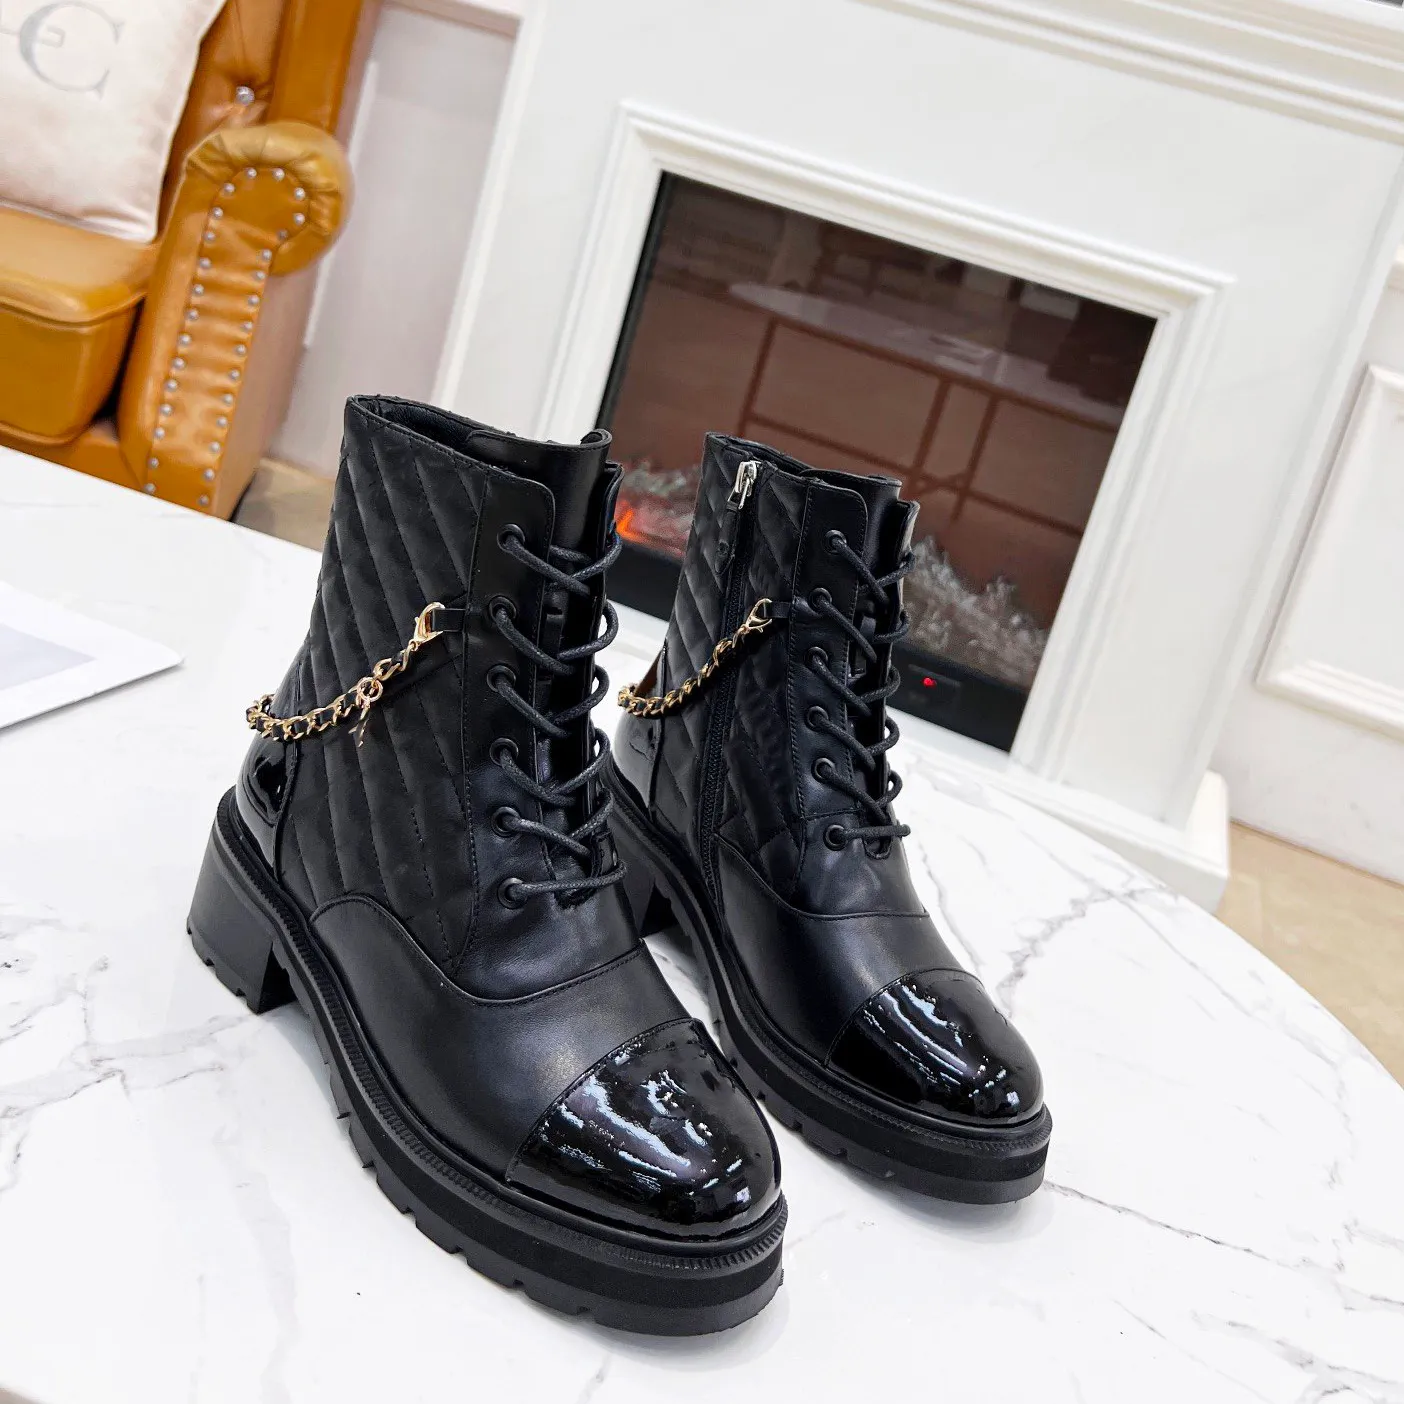 High Quality Ankle Boots Designer Leather Lace up Boot Fashion Women CCity Winter Booties Channel Sexy Warm Shoes sfd